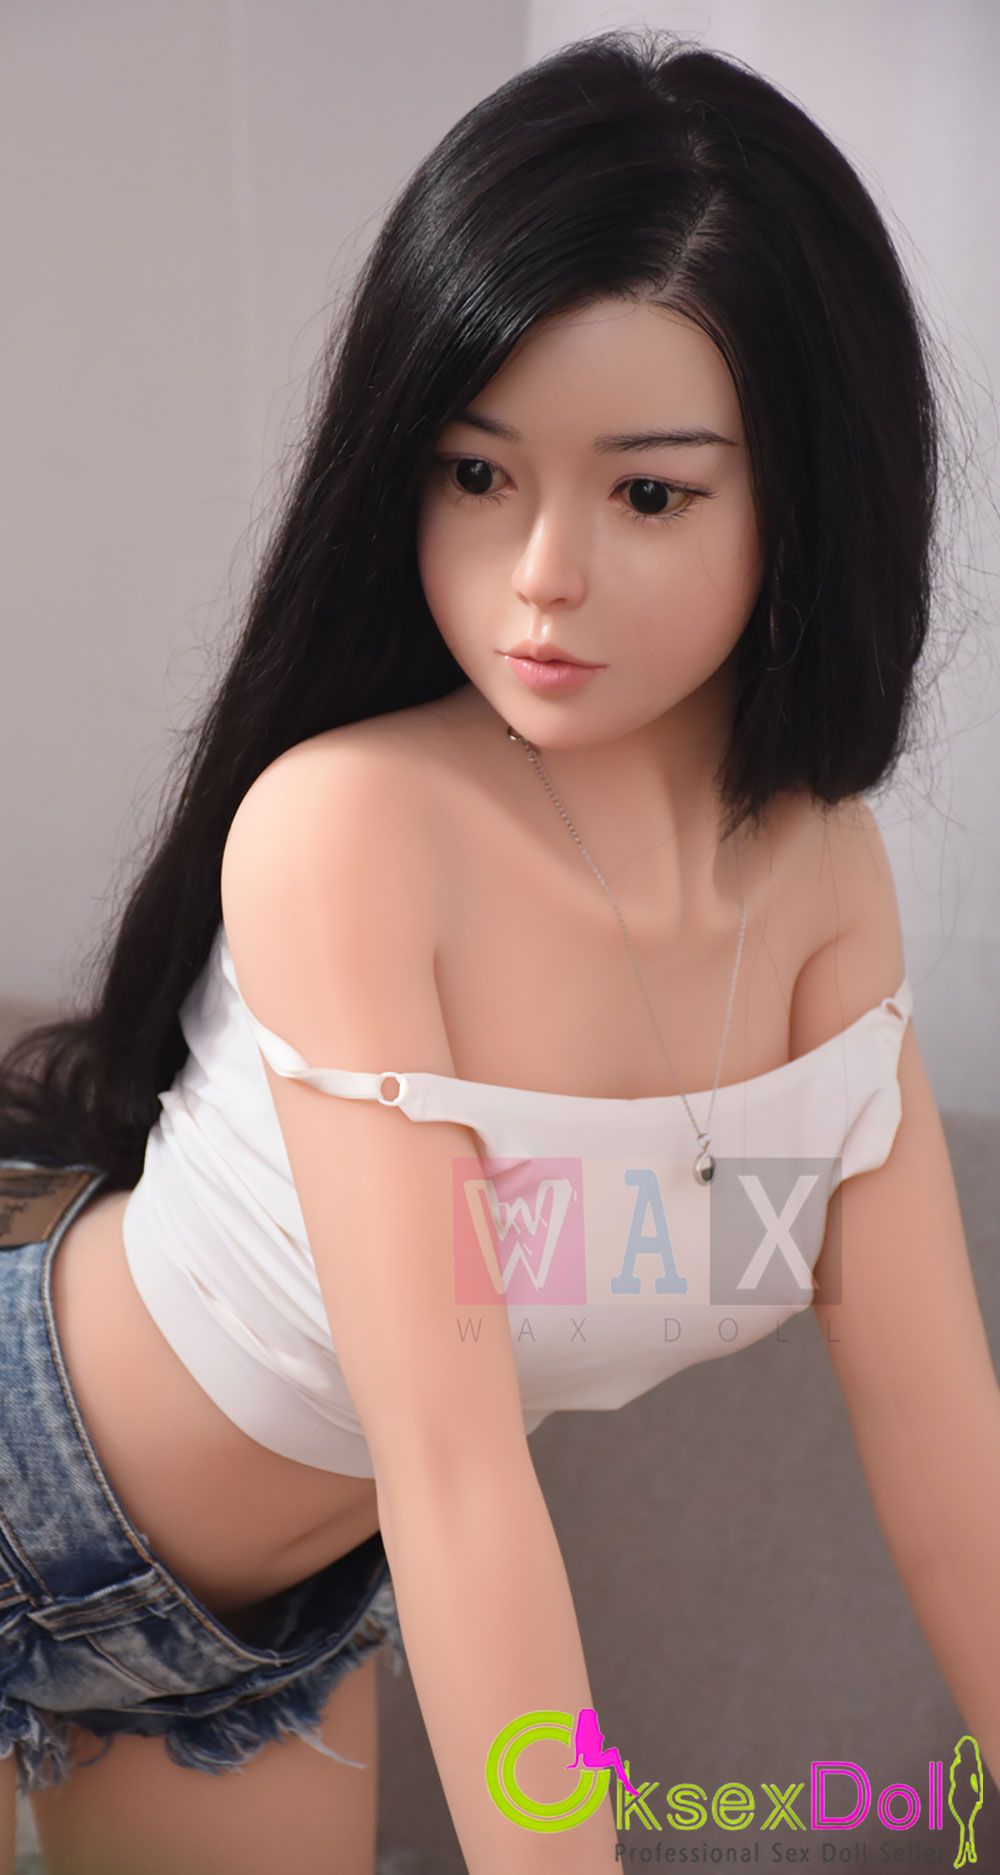 WAX doll Images